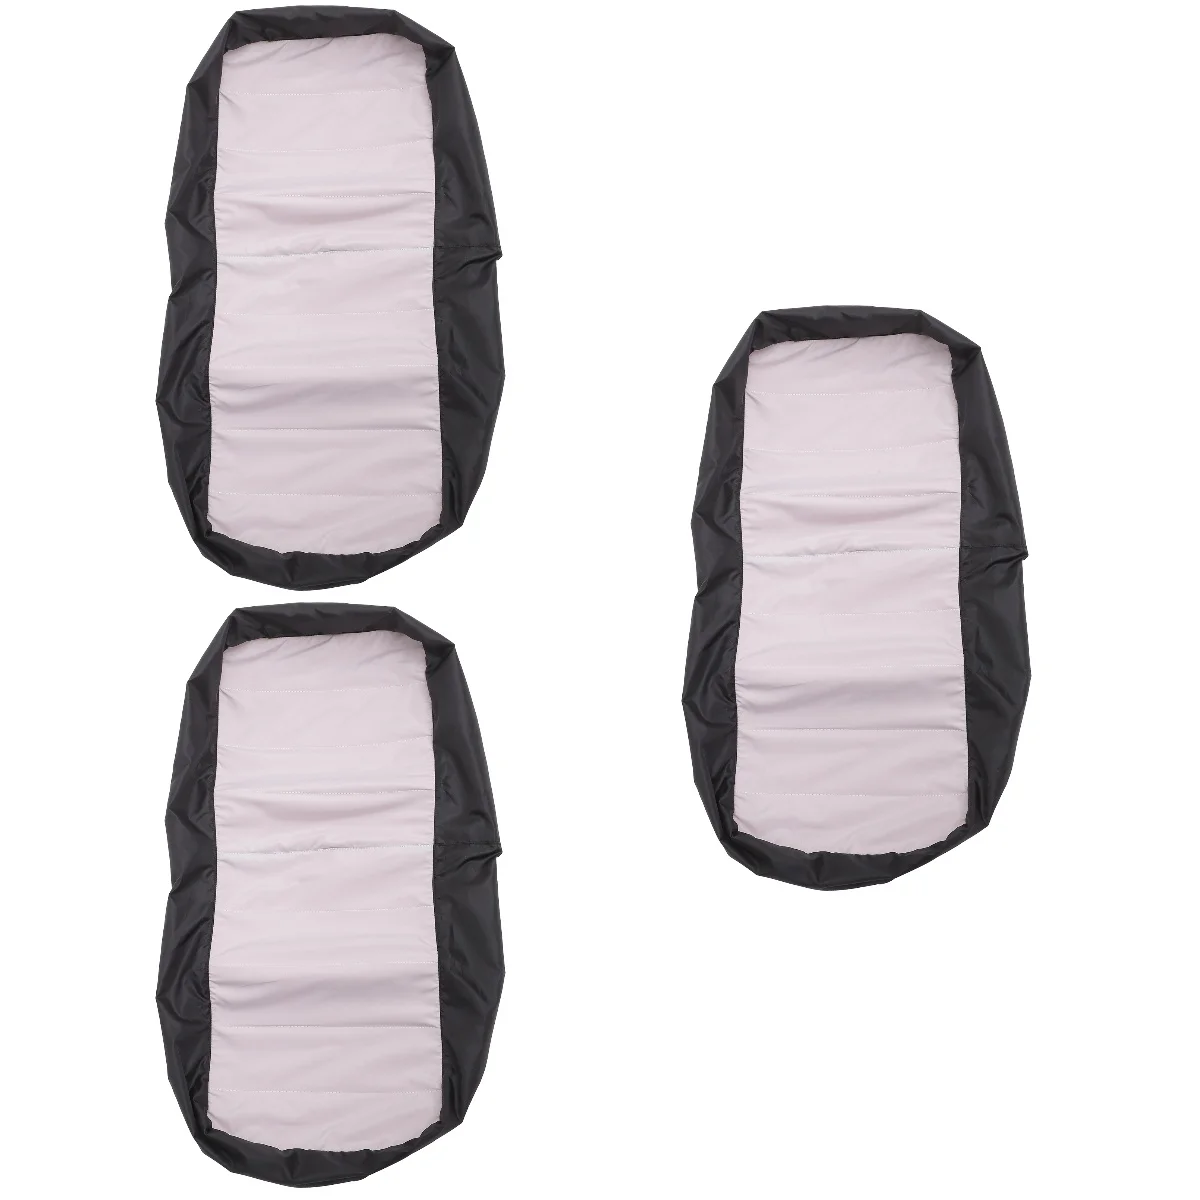 

3 pcs Durable Weeder Seat Cover Useful Dust-proof Cover Weeder Seat Protector